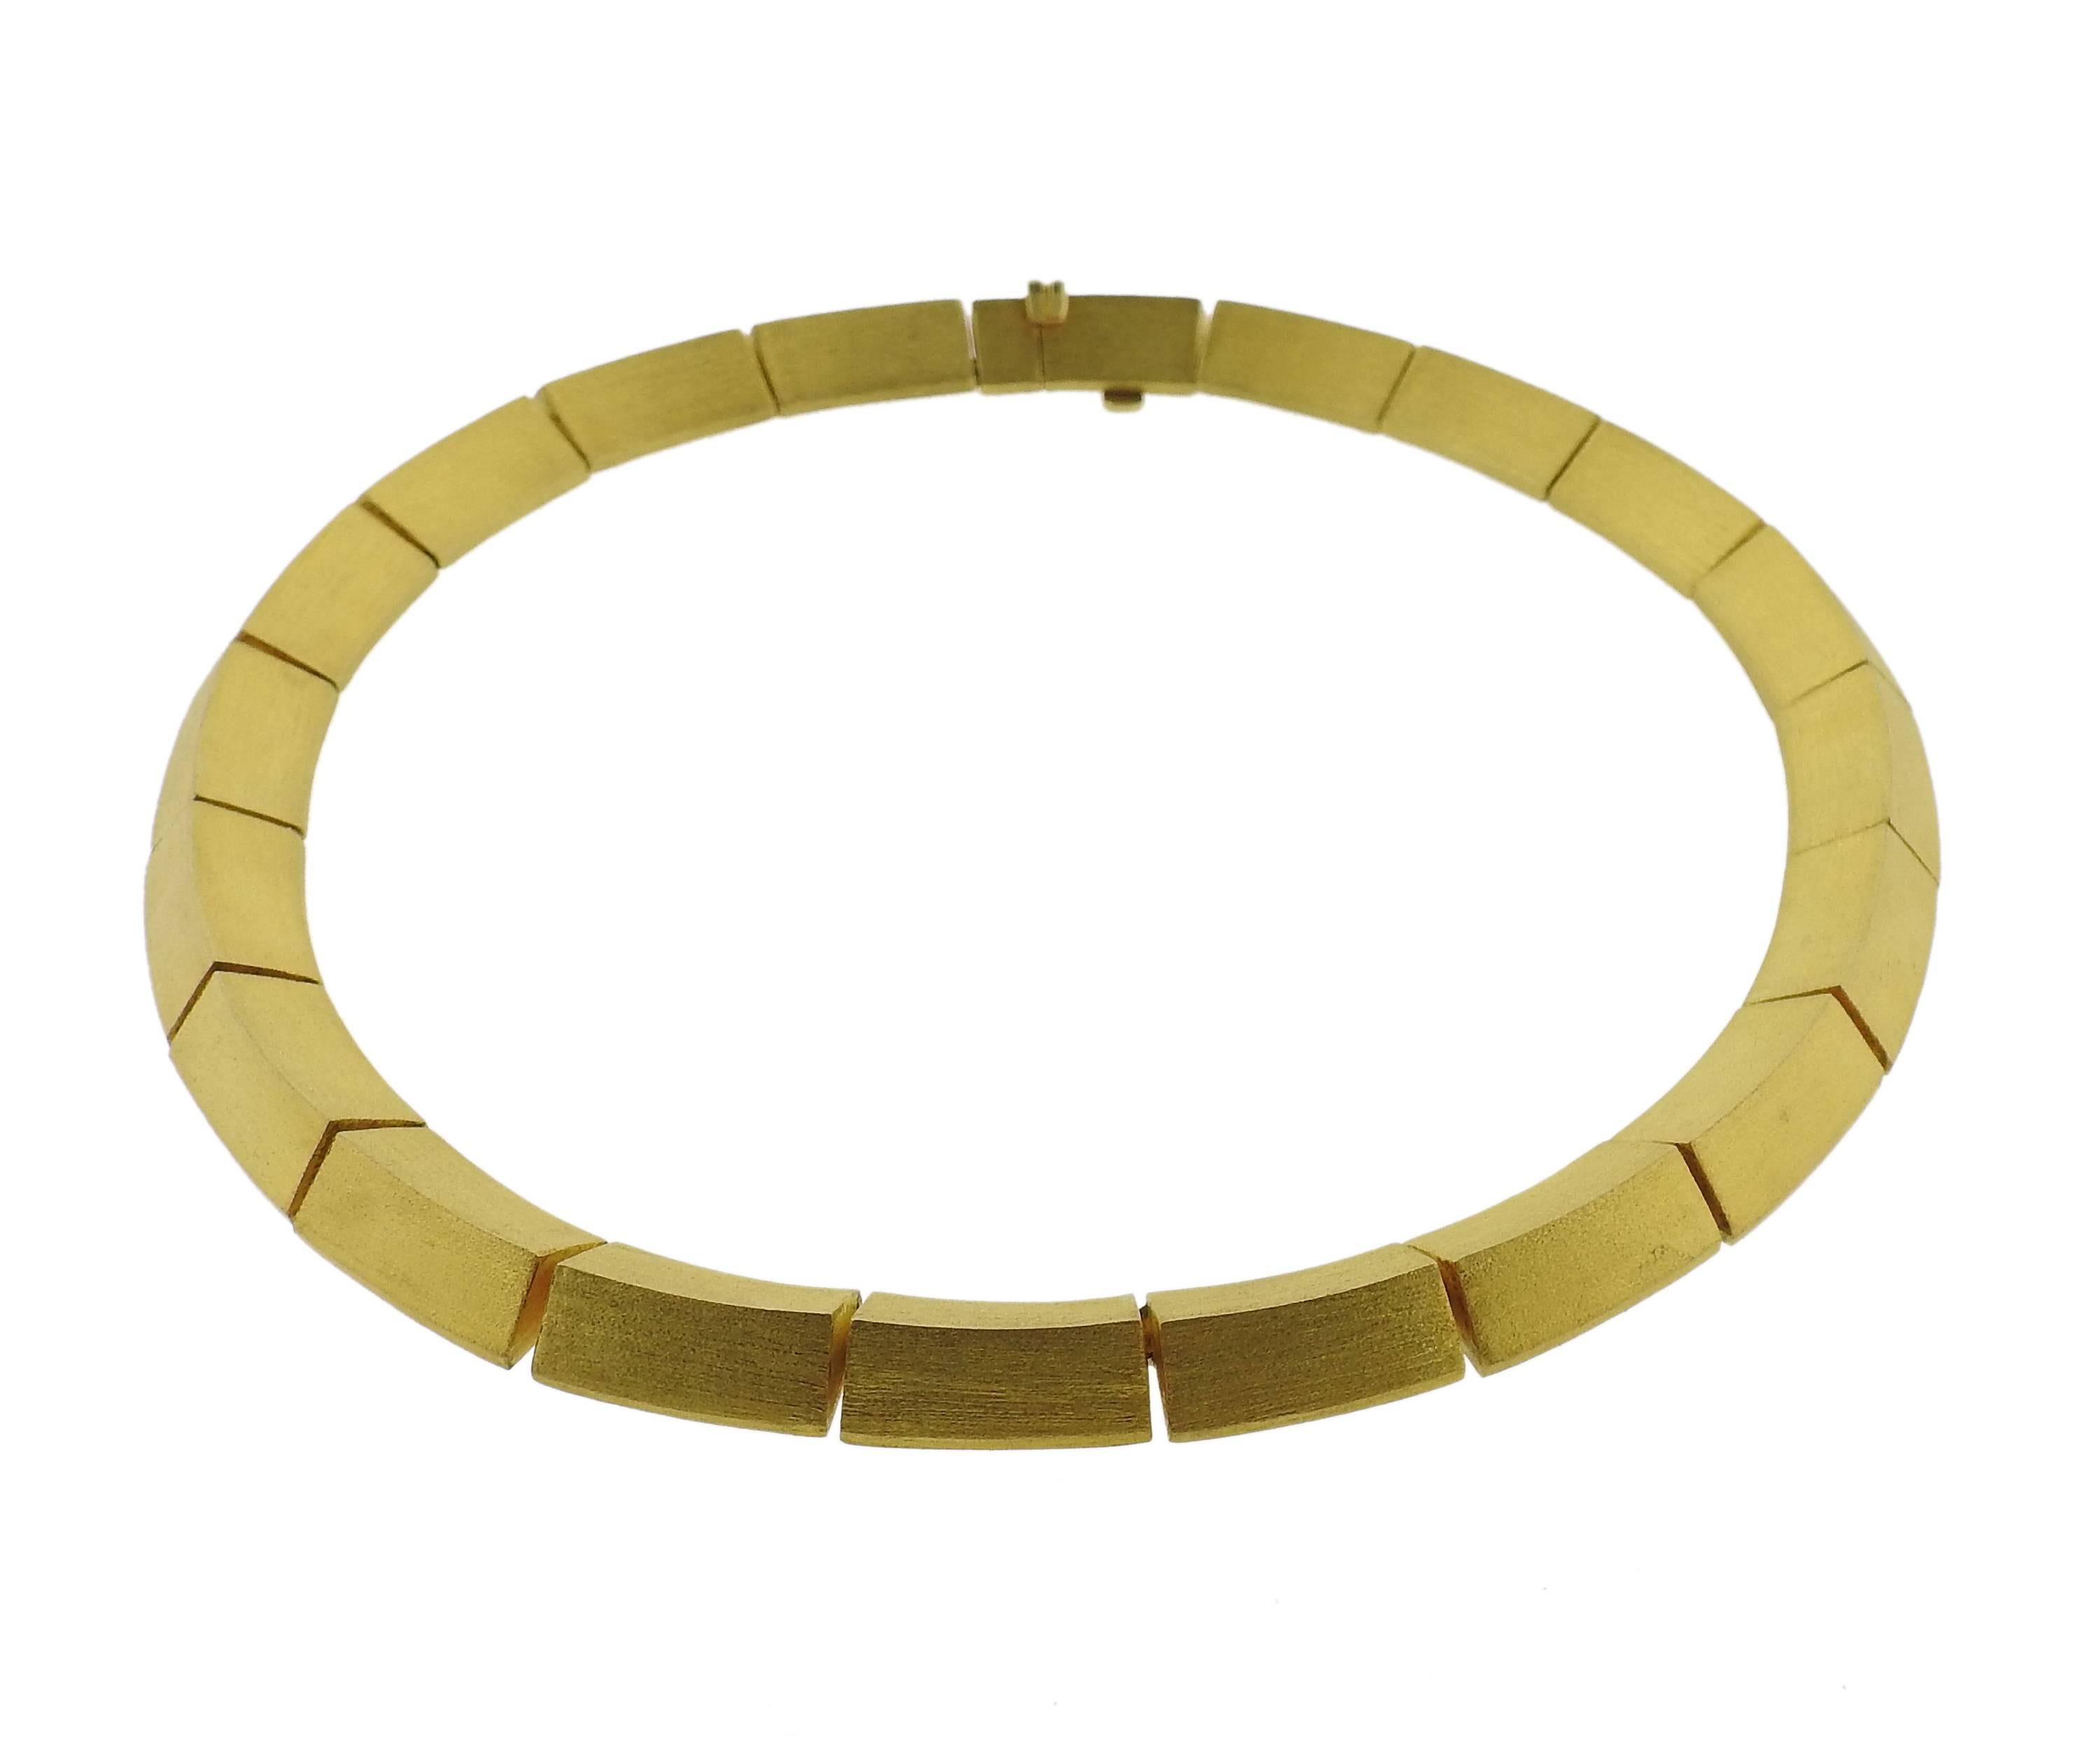 An 18k yellow gold necklace, crafted by Greek designer Maramenas Patras. Necklace is 15 1/2"; long and 13mm wide. Marked: 0.25 750 Maramenas Pateras. Weight - 85.5 grams 